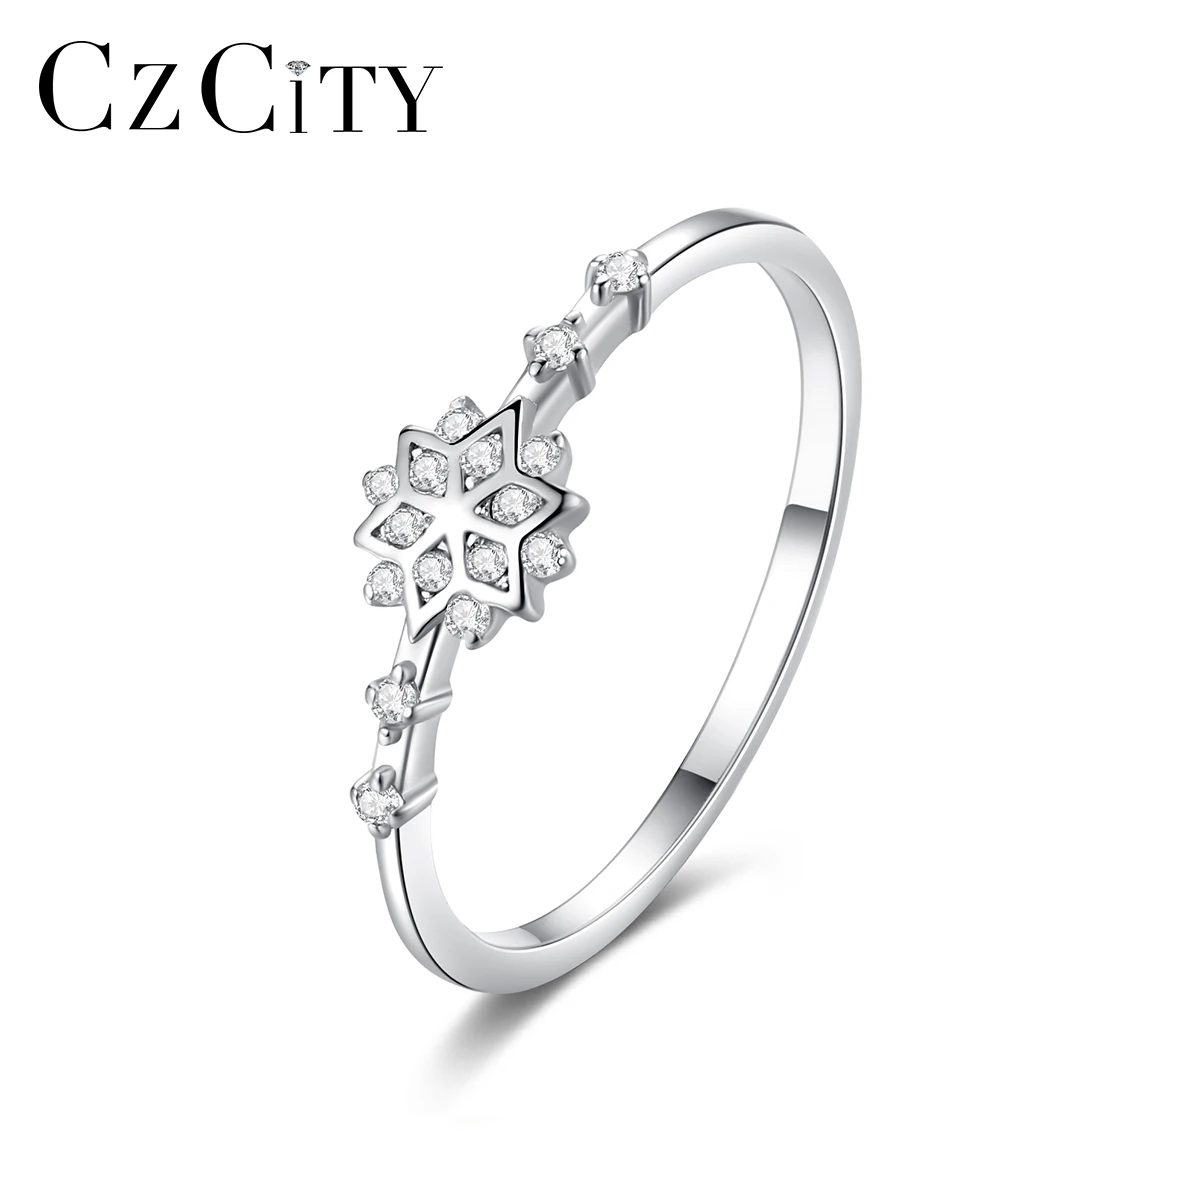 

CZCITY Lady 925 Sterling Silver Jewelry Woman Trendy Snowflake Metal Korean Promise Finger S925 Minimalist Ring